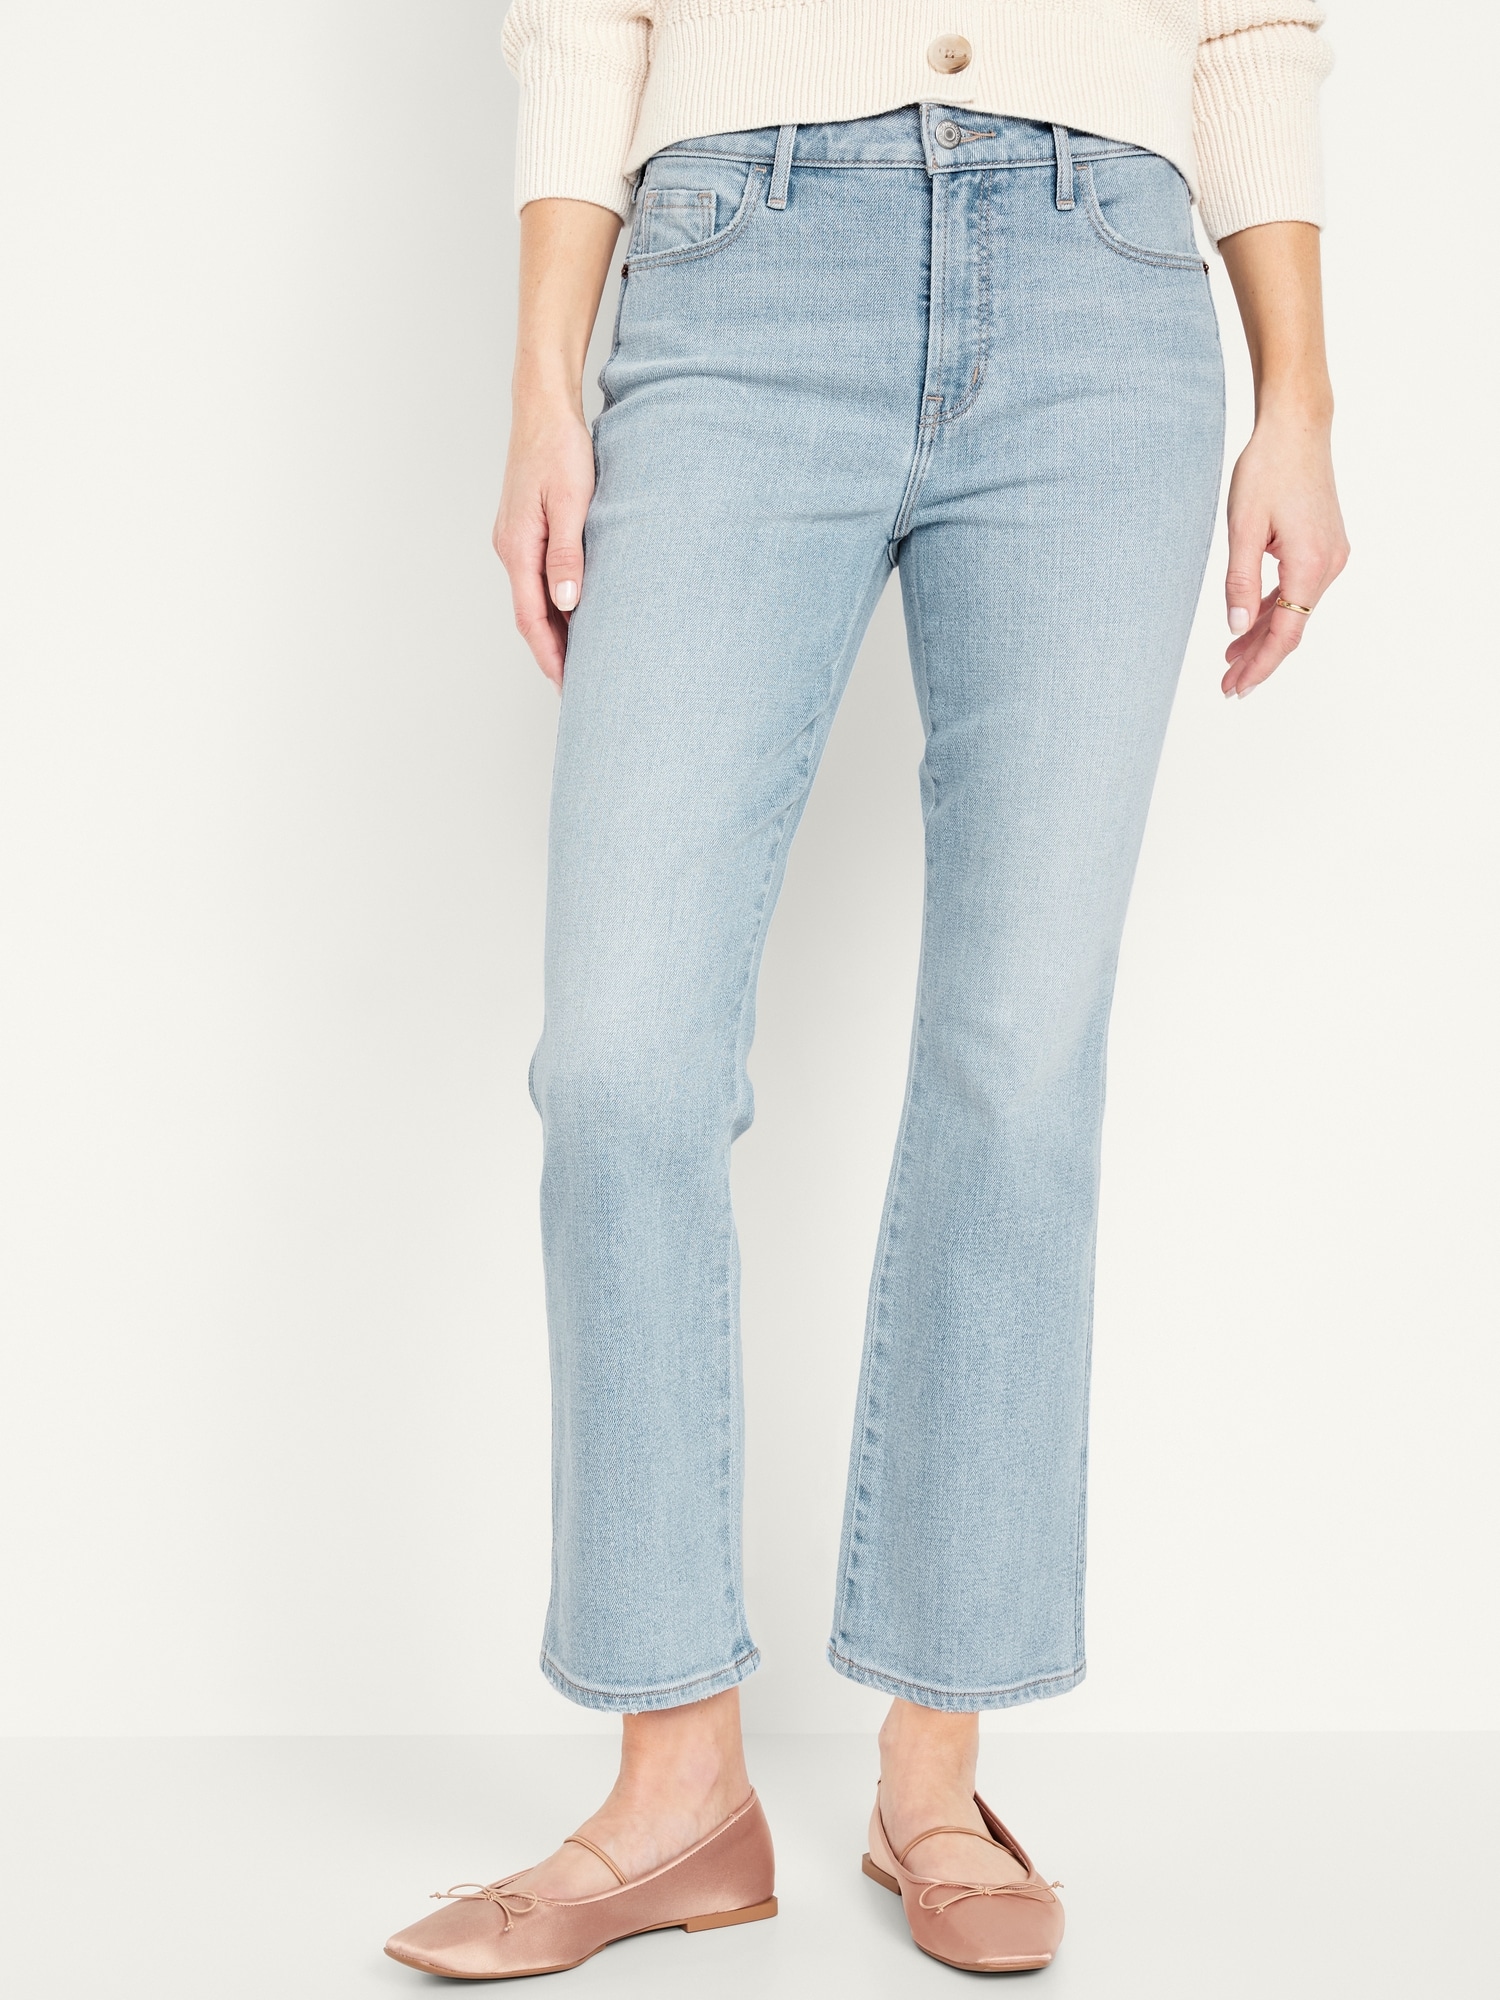 High-Waisted 90s Crop Flare Jeans Hot Deal